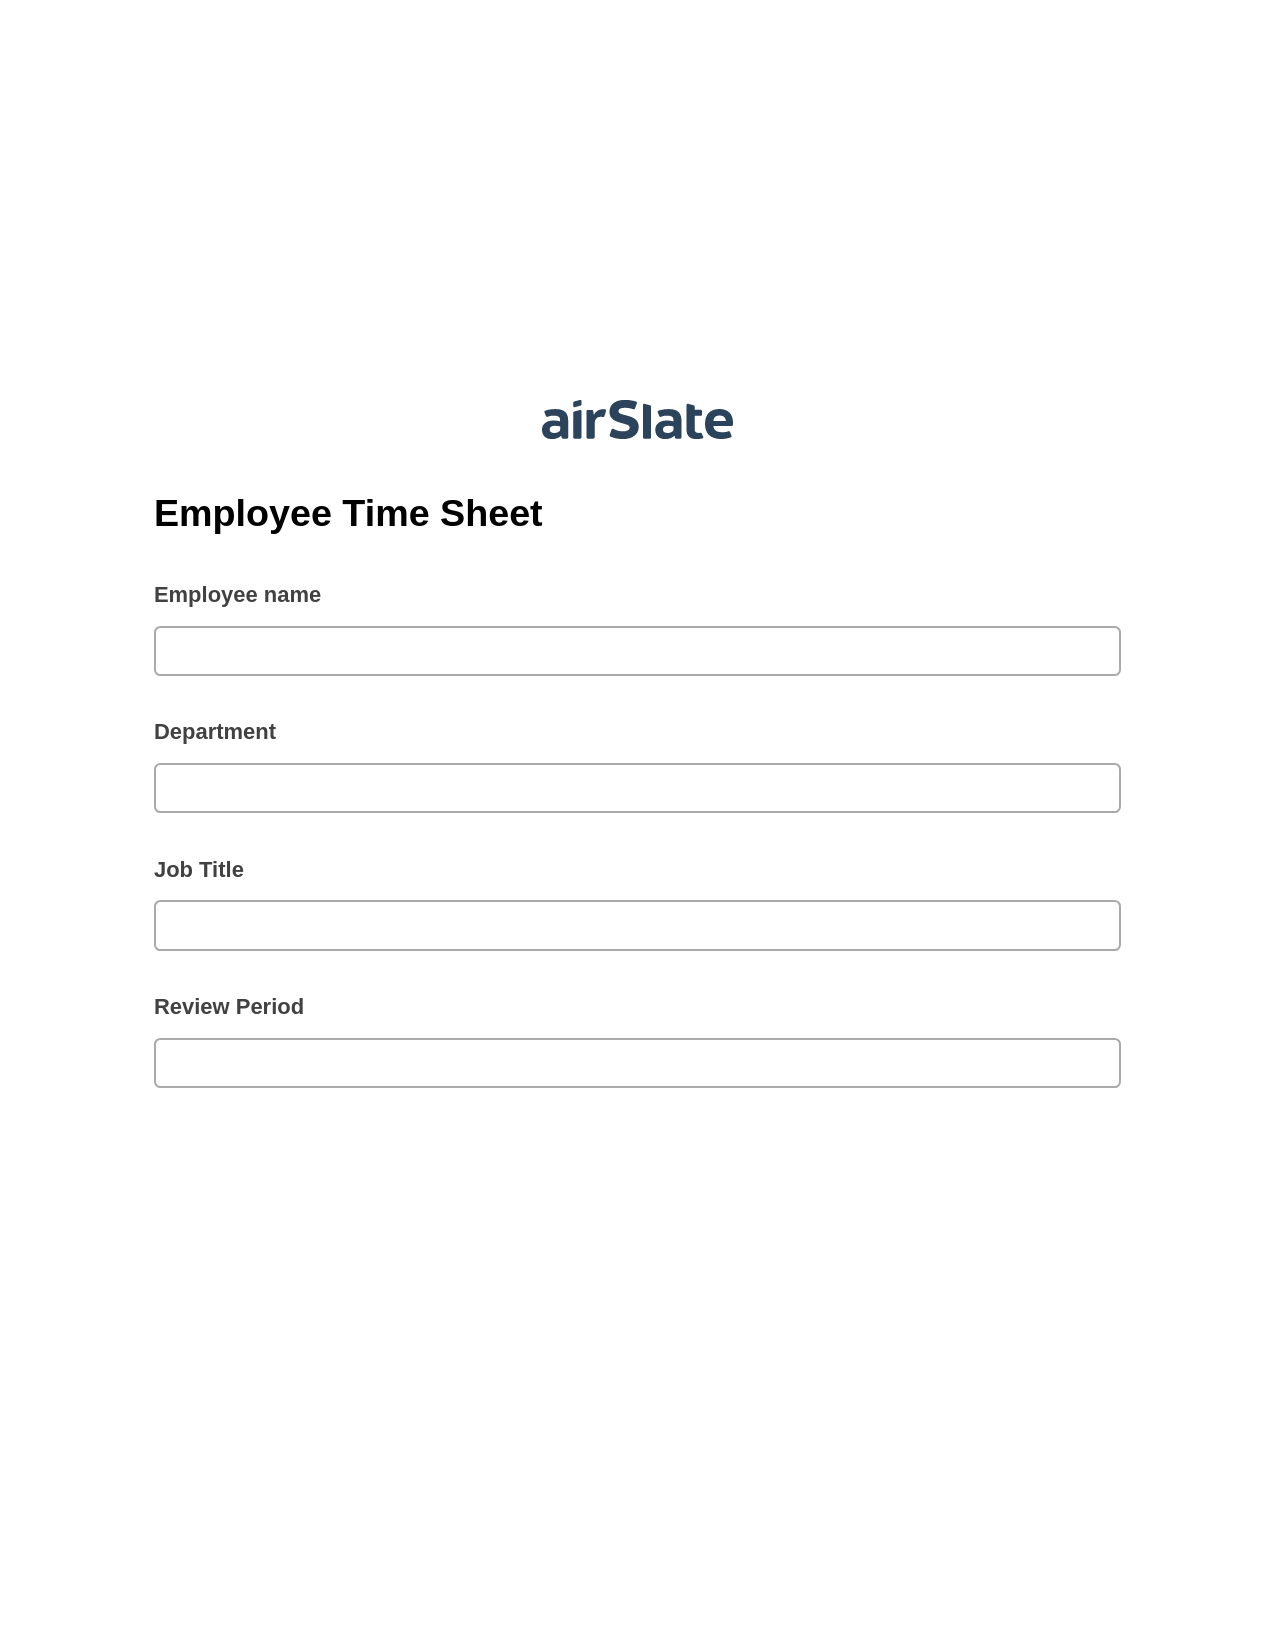 Multirole Employee Time Sheet Pre-fill Dropdowns from CSV file Bot, Create Salesforce Records Bot, Export to NetSuite Bot